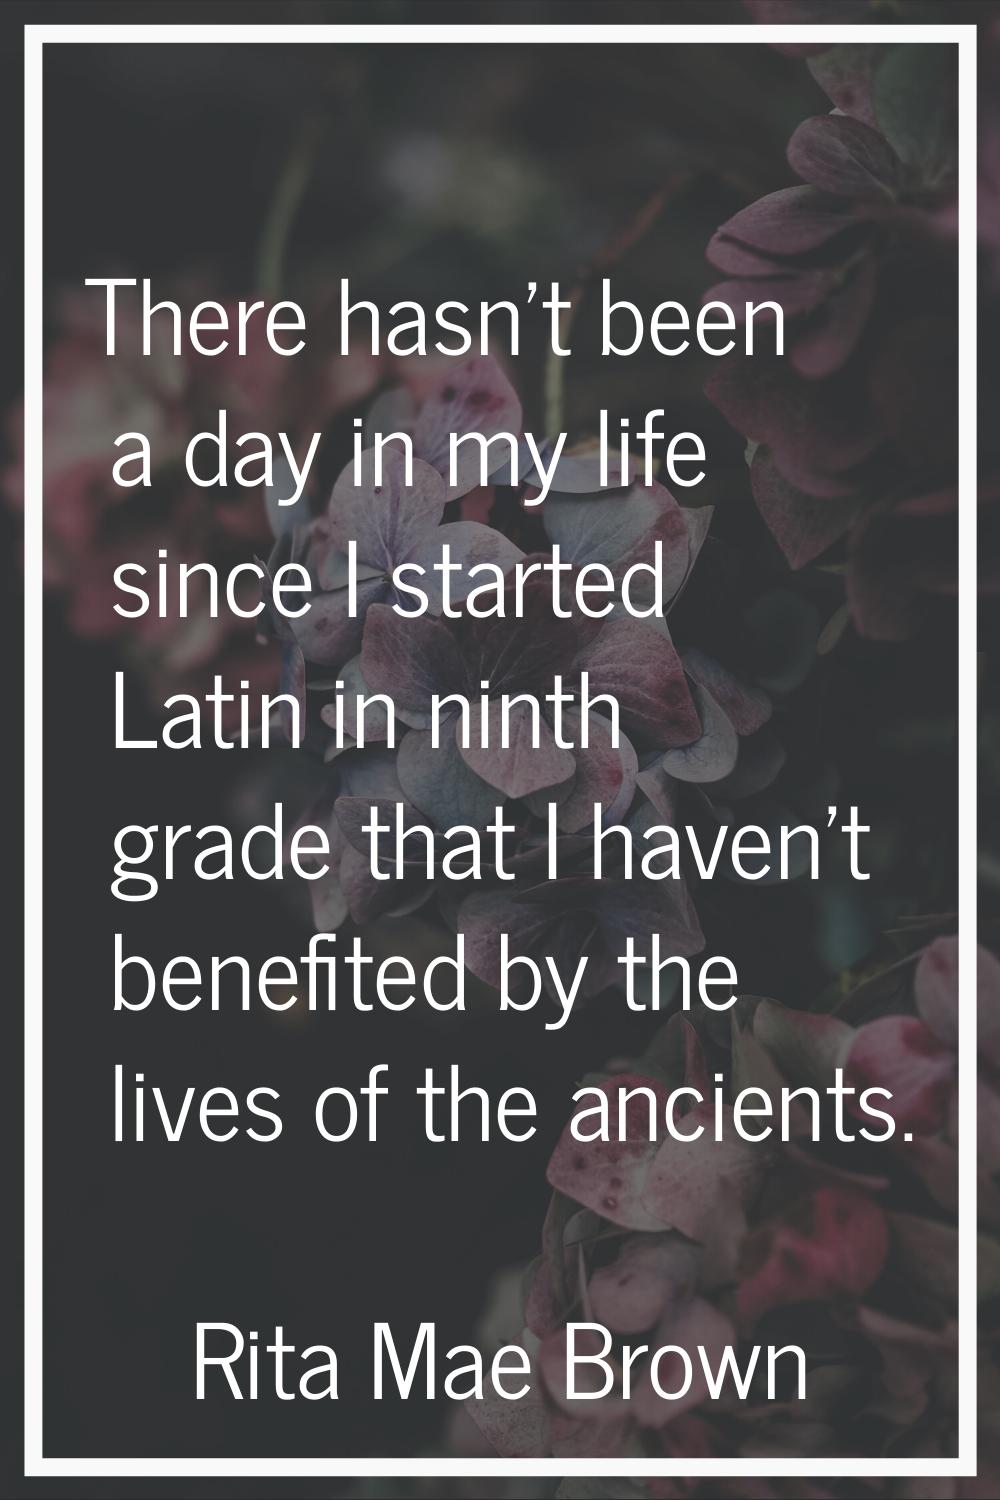 There hasn't been a day in my life since I started Latin in ninth grade that I haven't benefited by